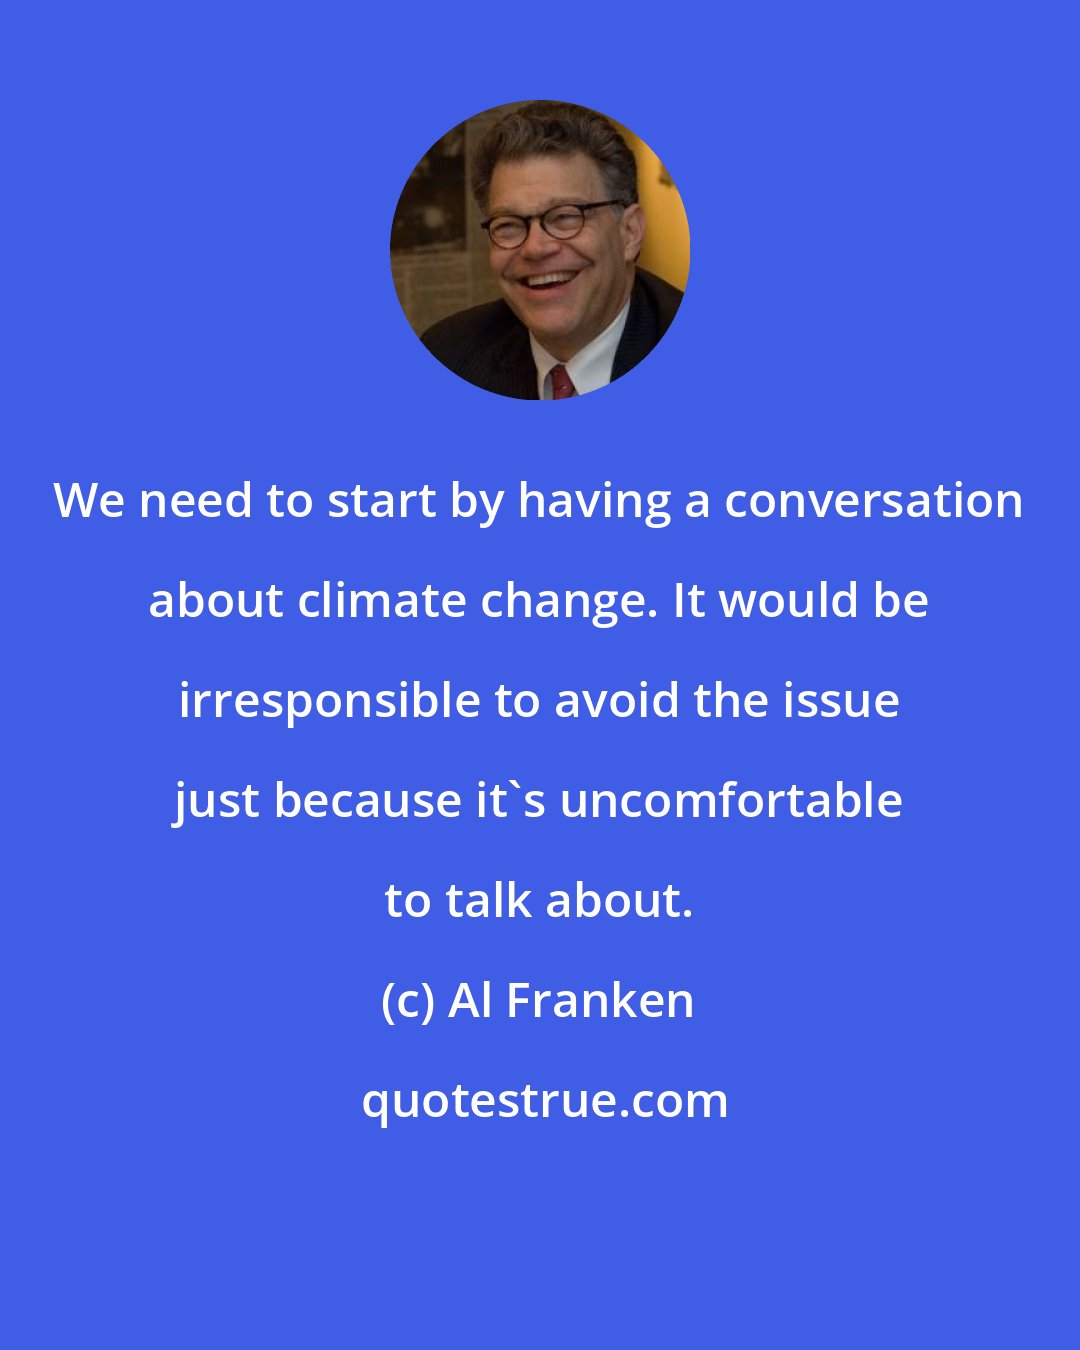 Al Franken: We need to start by having a conversation about climate change. It would be irresponsible to avoid the issue just because it's uncomfortable to talk about.